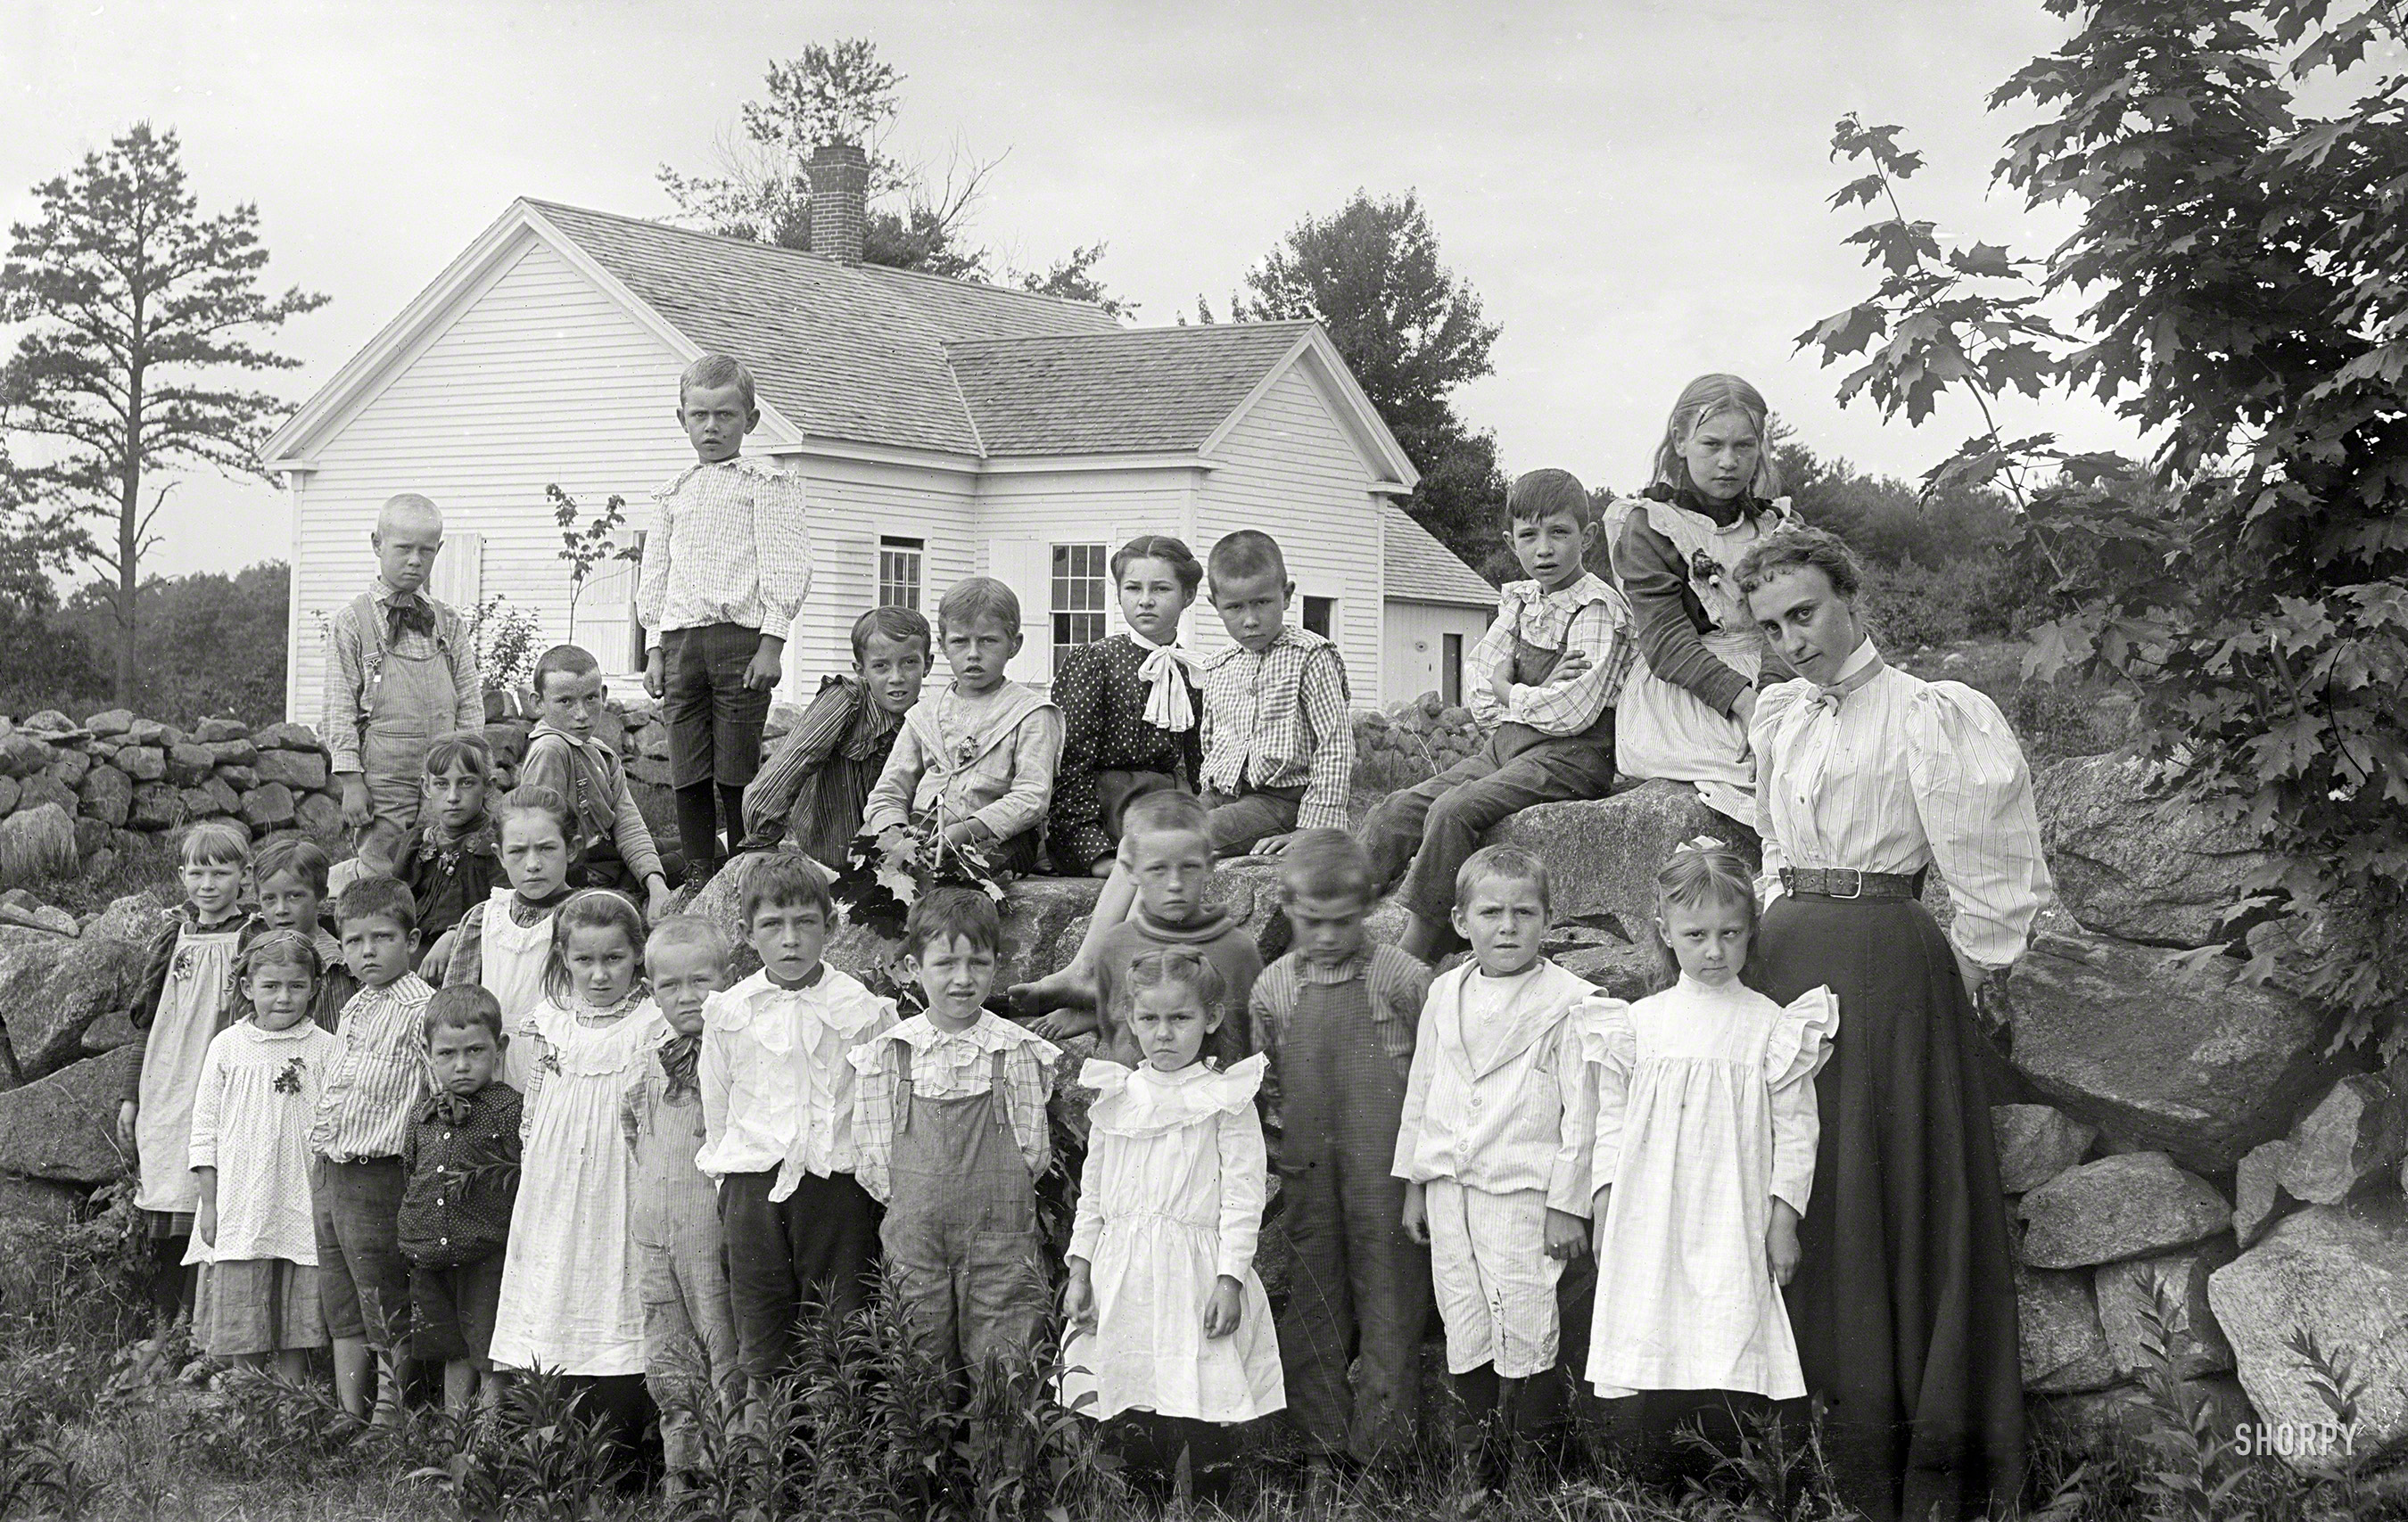 From the same circa 1900 batch of 5x8 glass negatives as Little Boy Blue we bring you more sullen moppets than you can shake a stick at. Which the tot in the middle is holding. Now, smile for your great-great grandchildren. View full size.